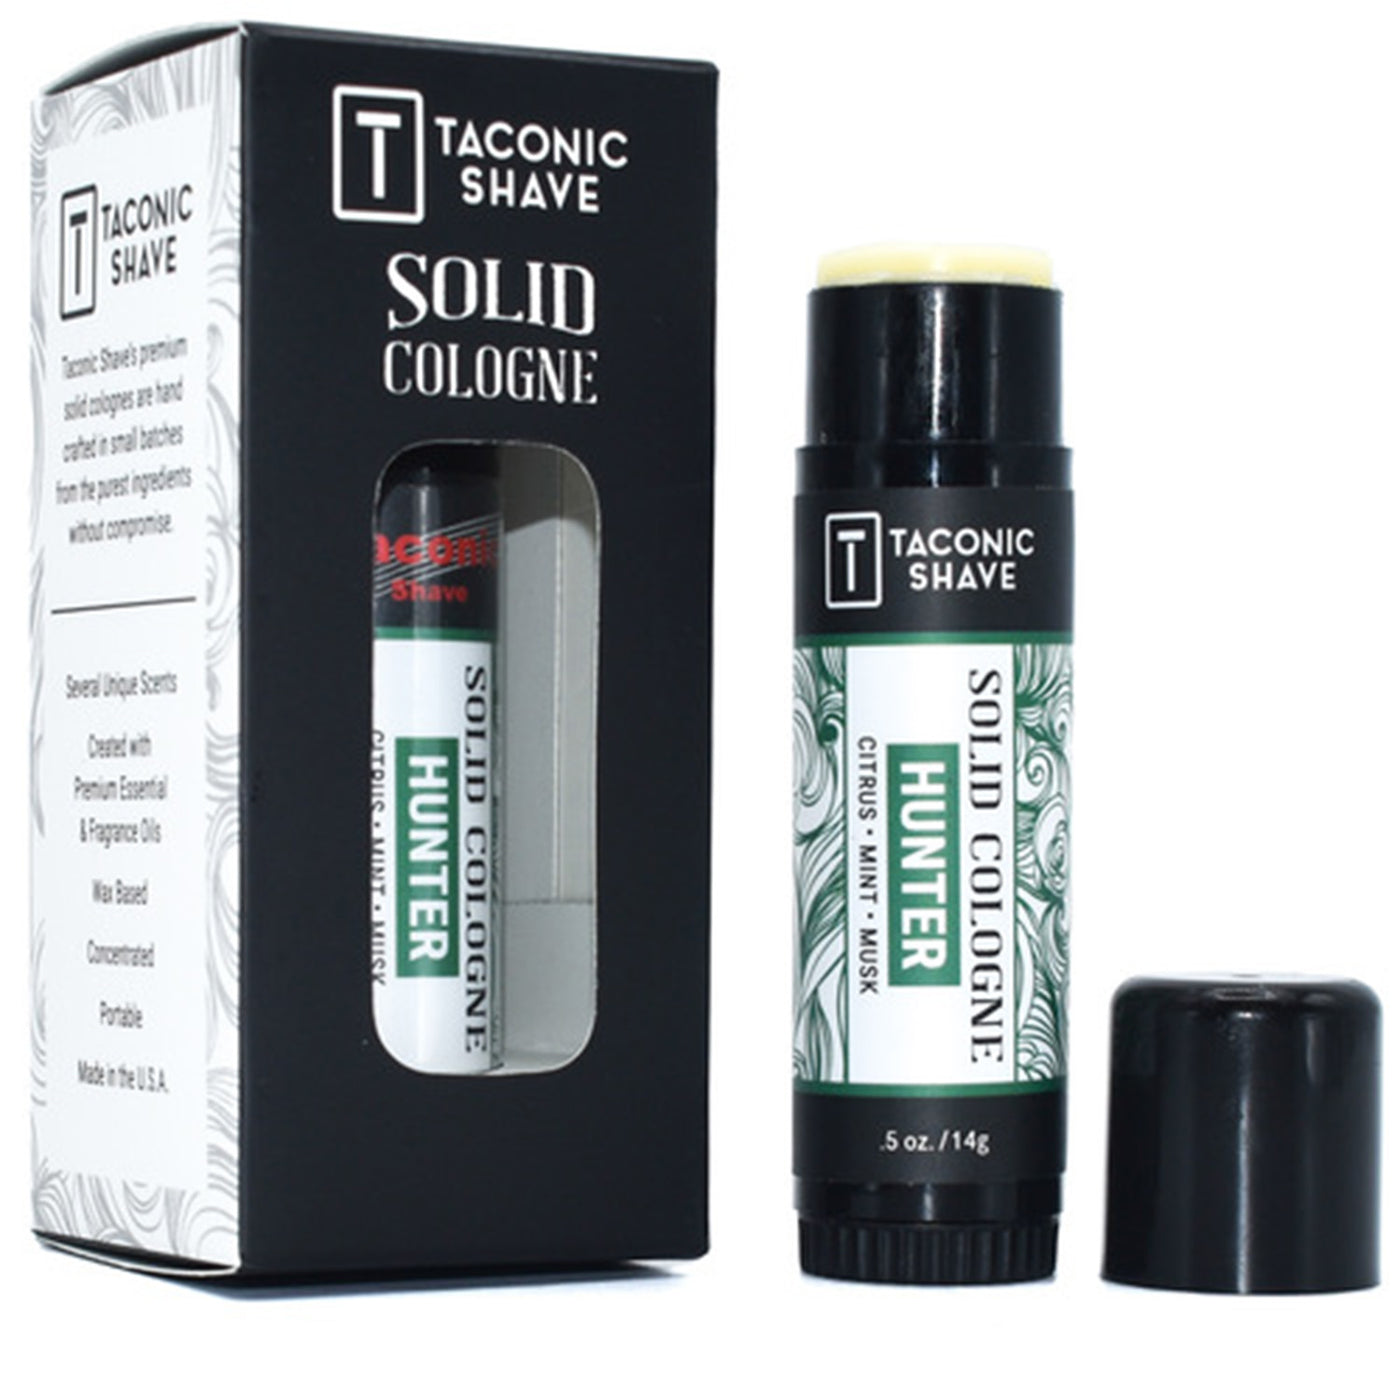  Taconic Shave Hunter Solid Cologne by Taconic Shave sold by Naked Armor Razors